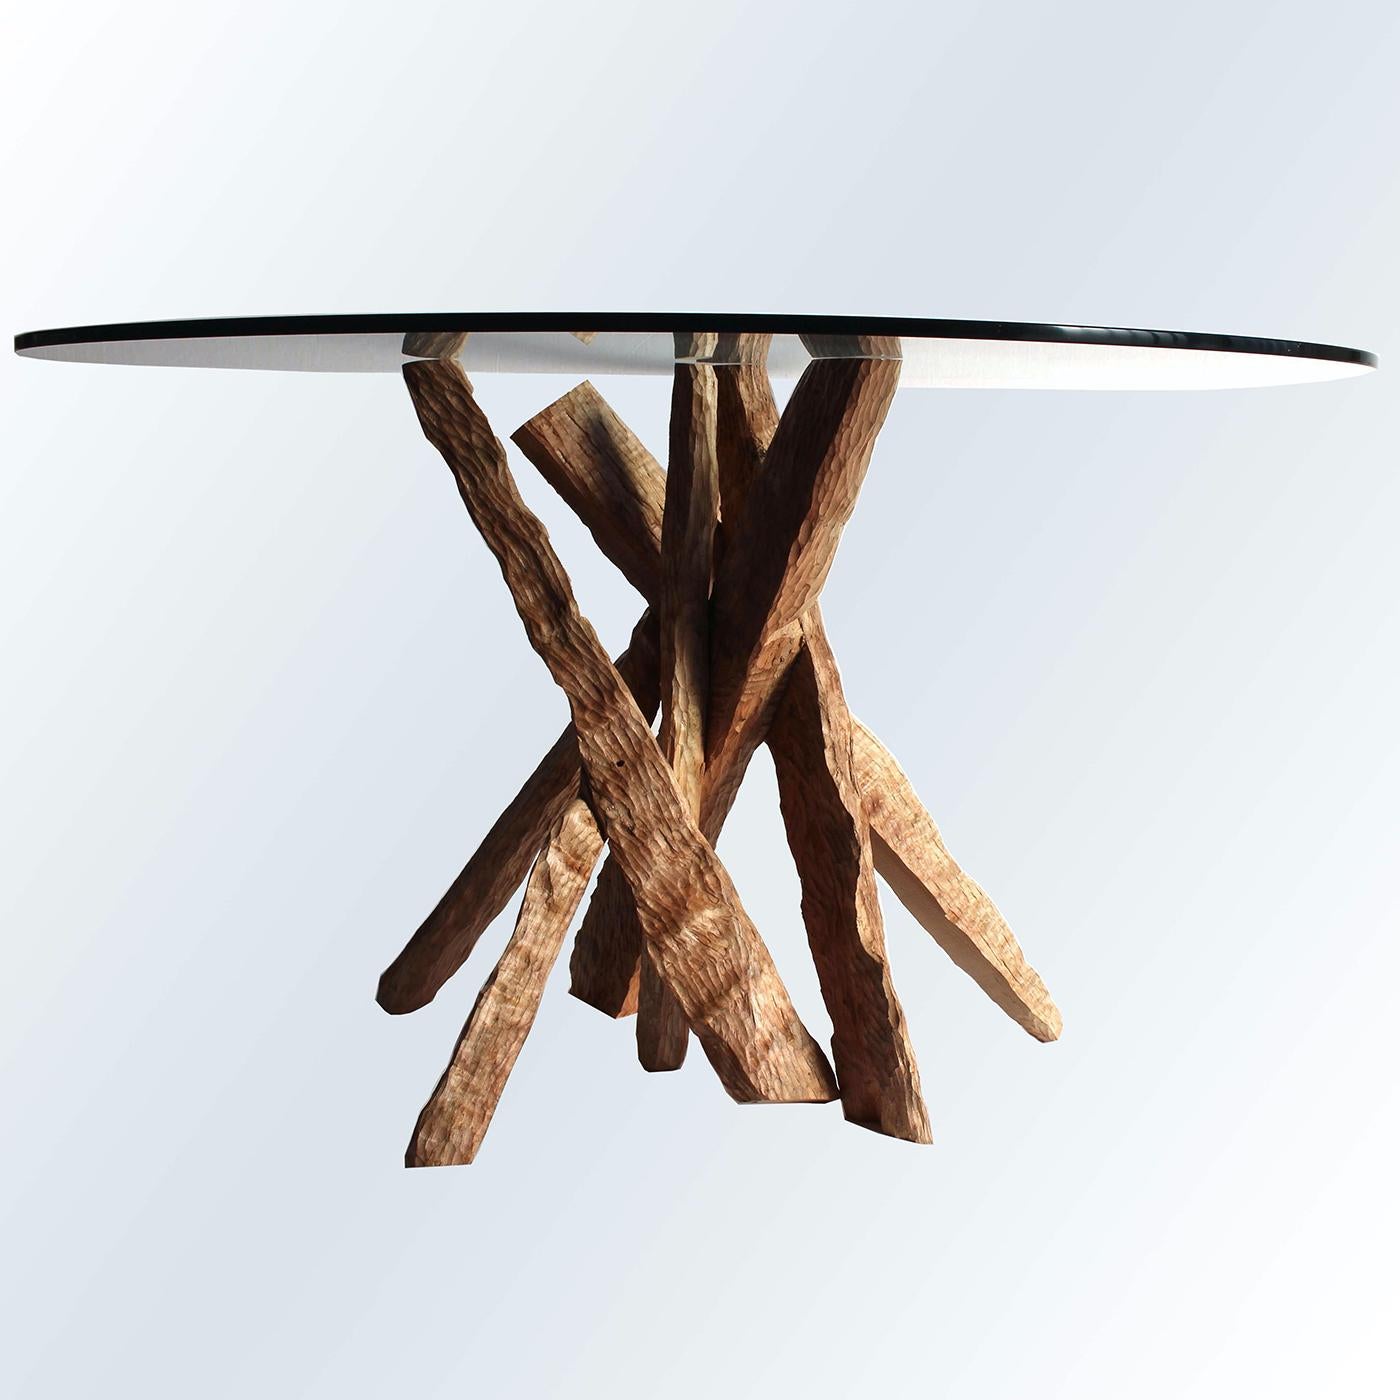 This stunning table by Pietro Meccani combines rustic with Minimalist to create a unique aesthetic. Its solid cherrywood base is beautifully hand-sculpted, arranged into an elegant cluster that showcases its natural beauty. Finished with a round